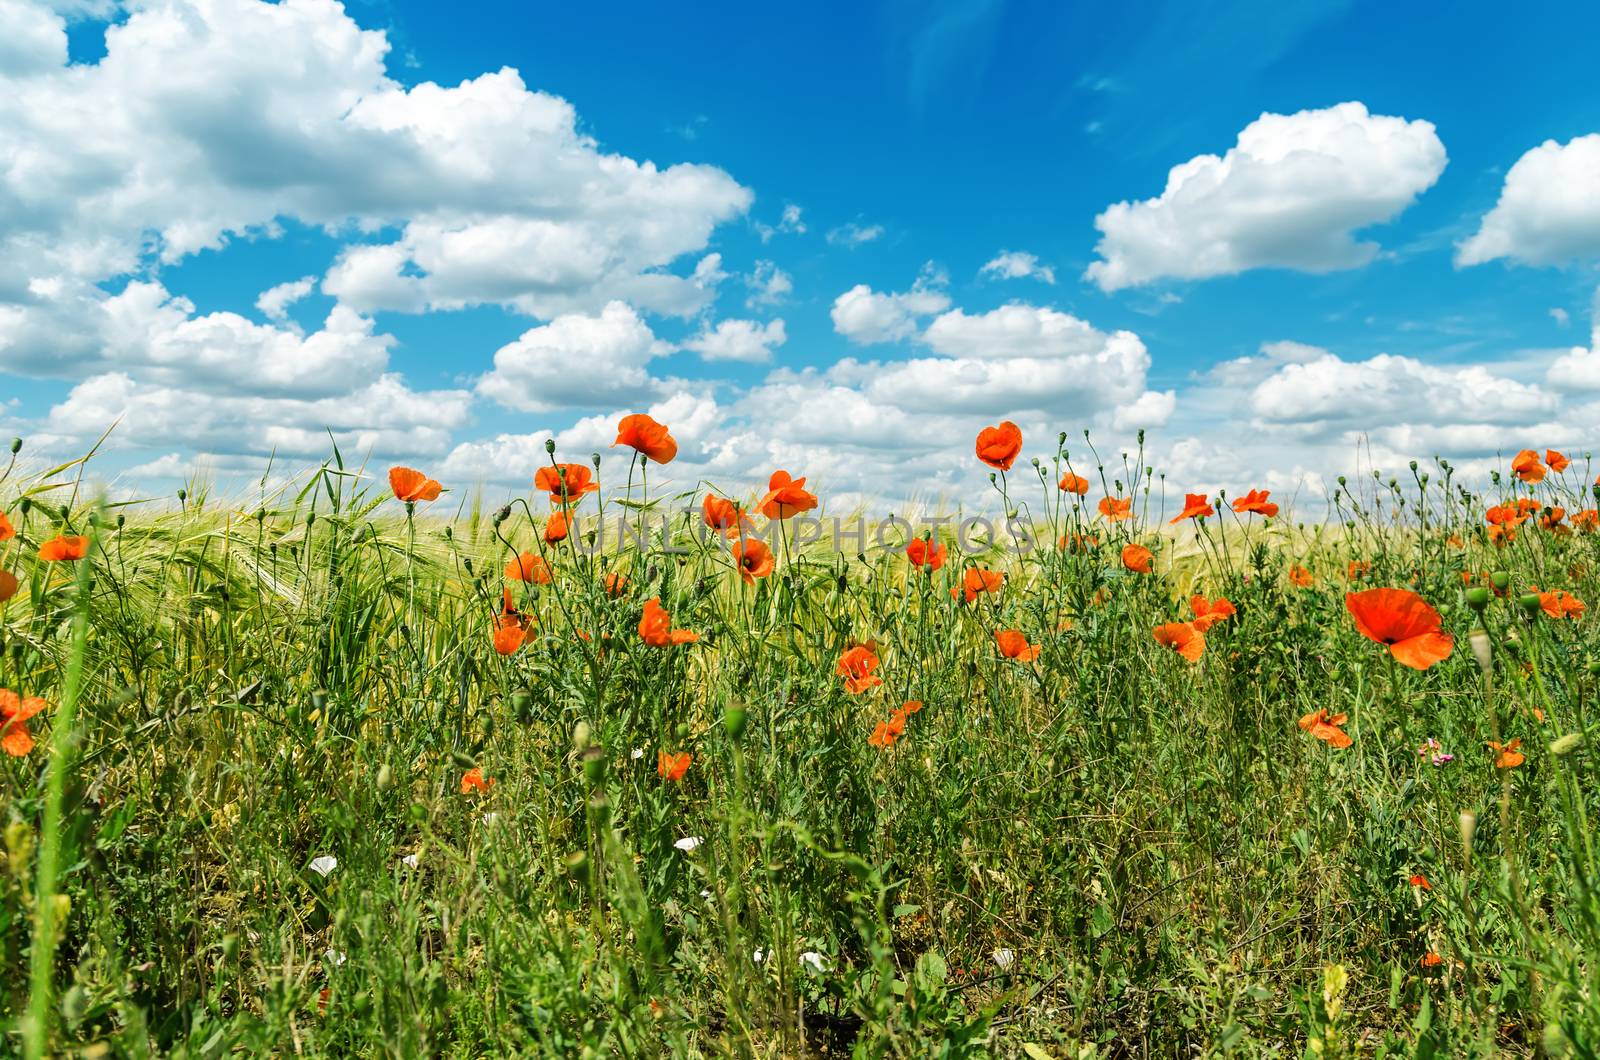 red poppies in green field under sky with clouds. soft focus on field